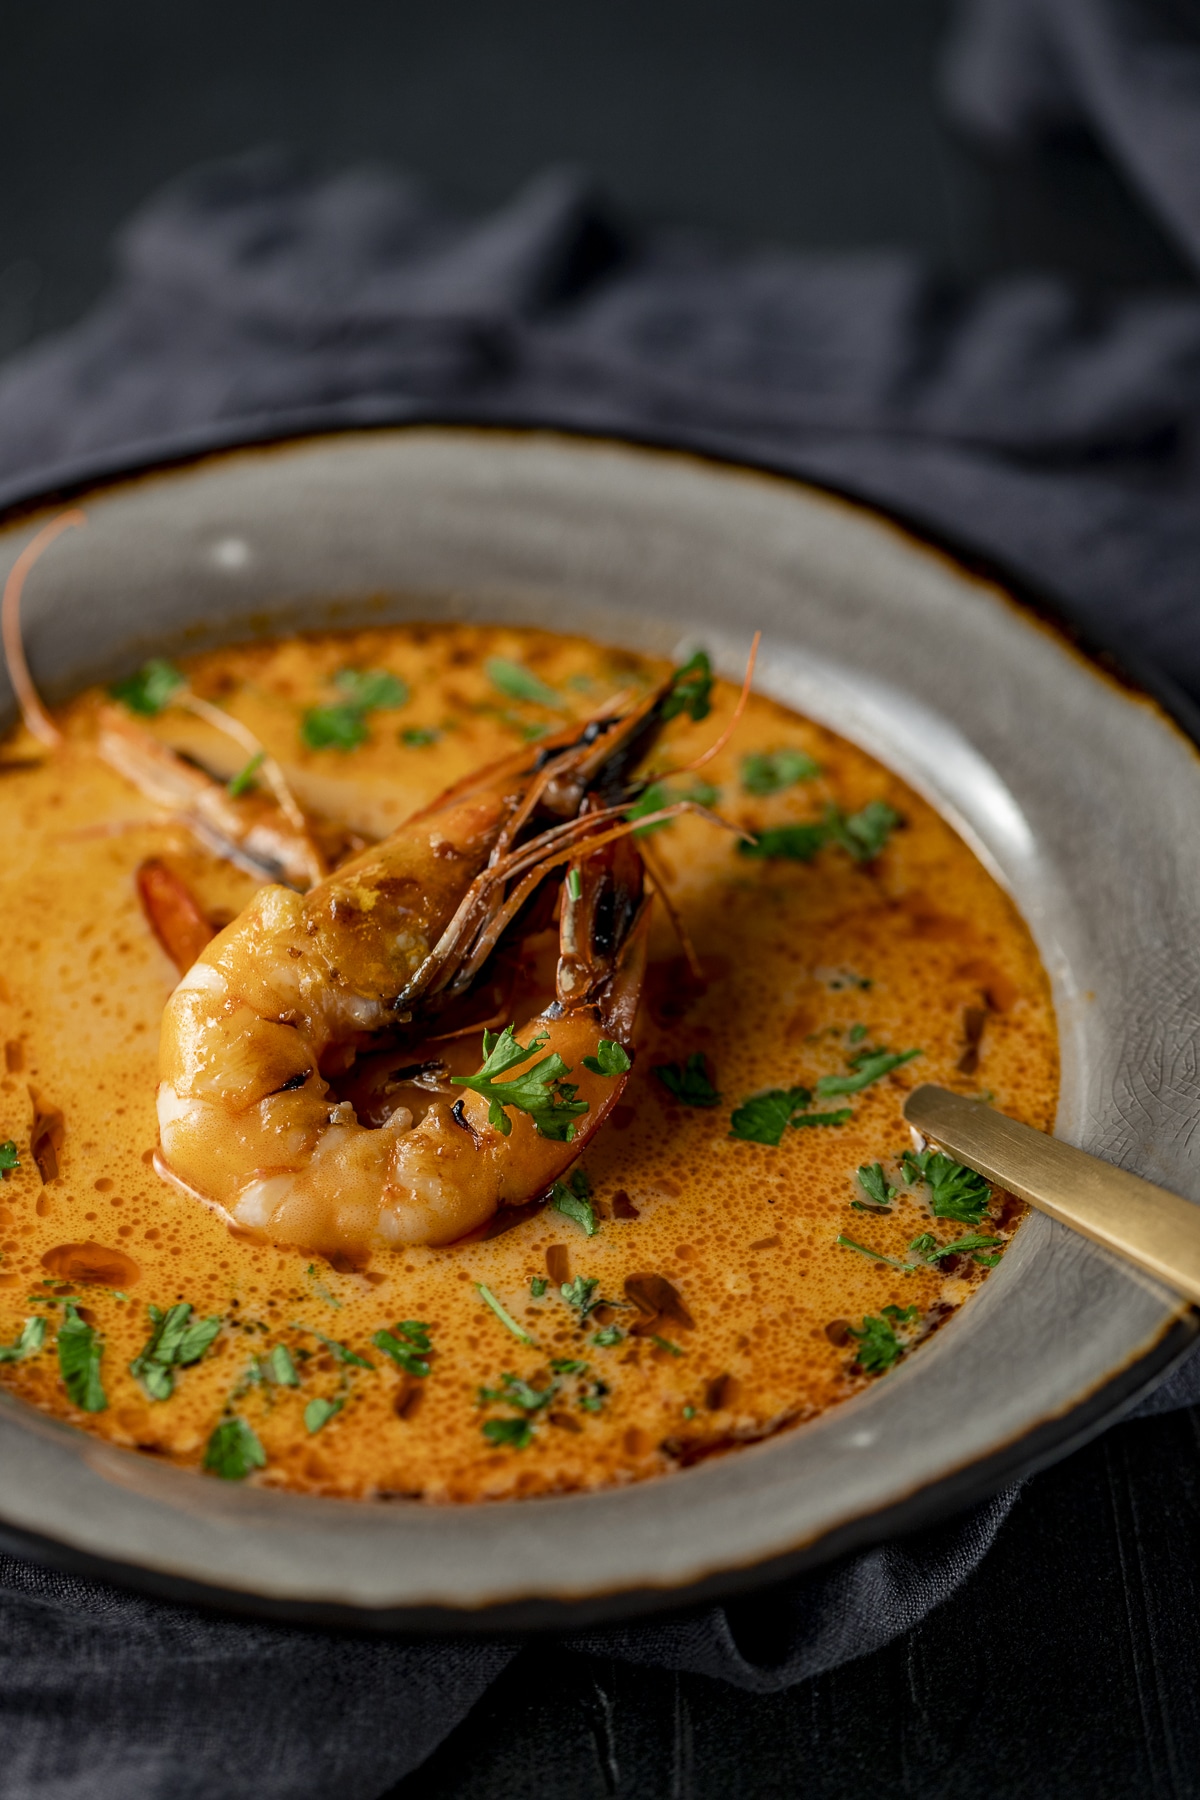 Side view of bisque in a grey bowl with a prawn on top.